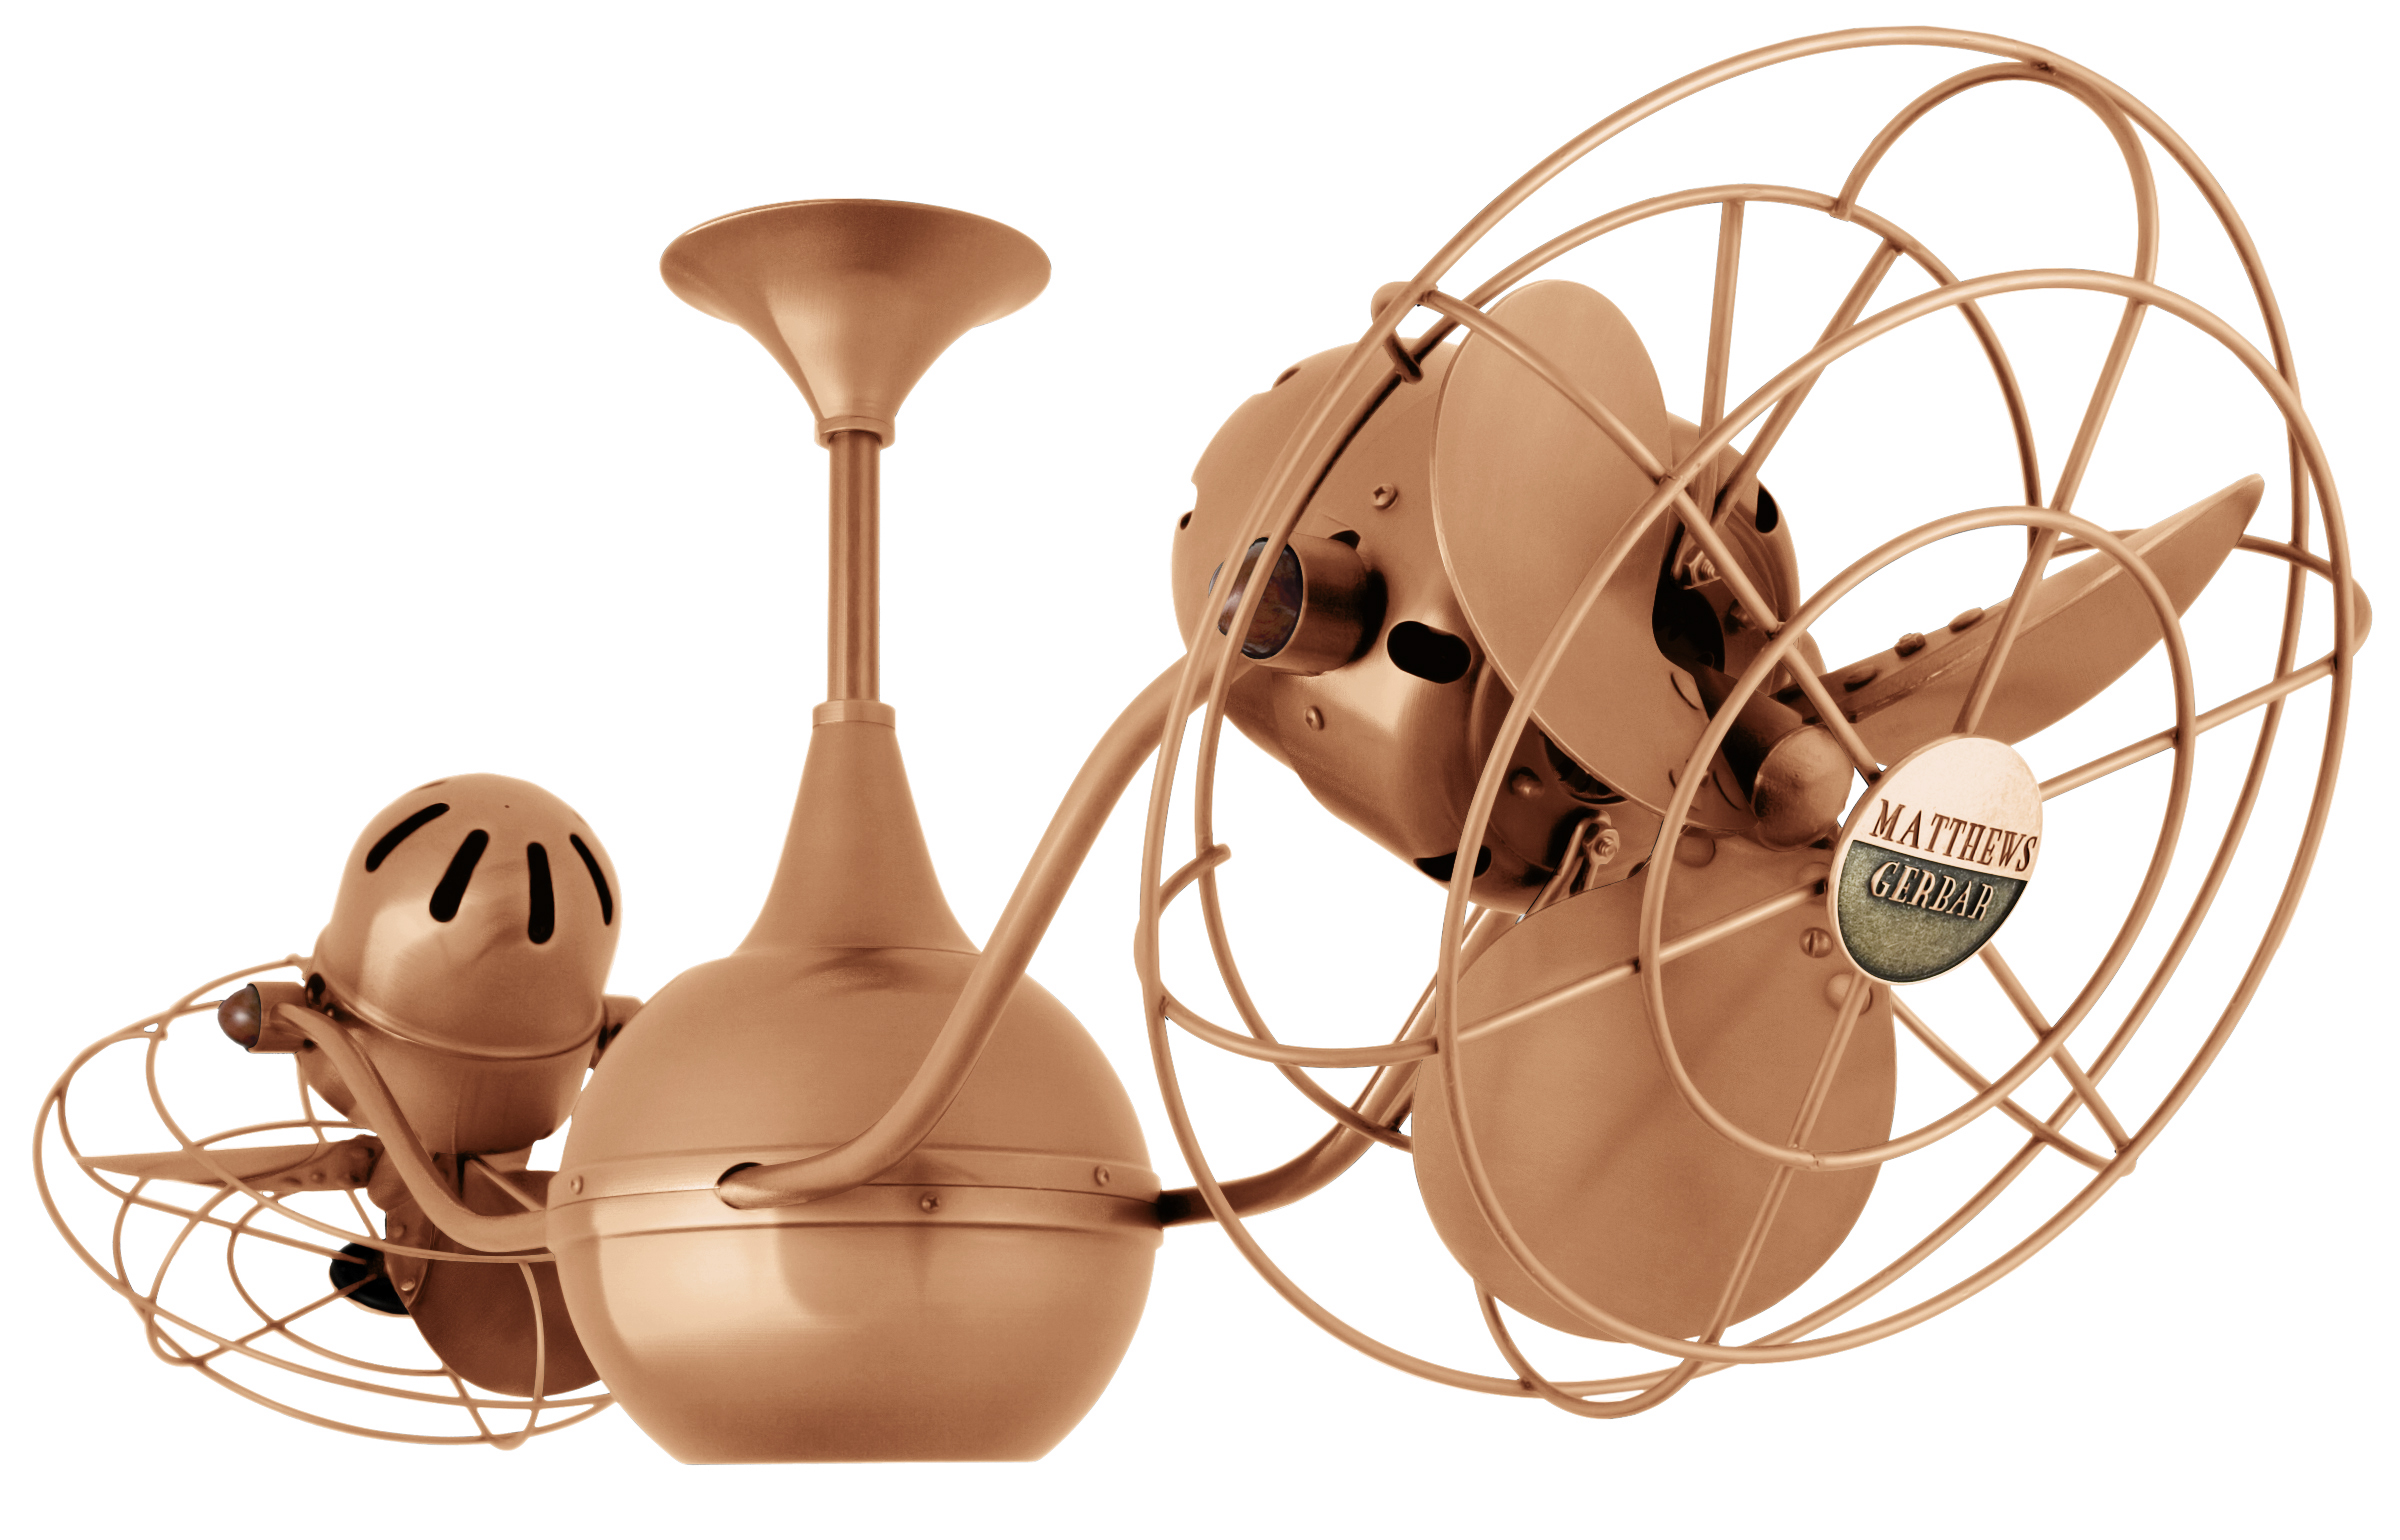 Vent-Bettina rotational dual head ceiling fan in Brushed Copper finish with metal blades in decorative cages made by Matthews Fan Company.